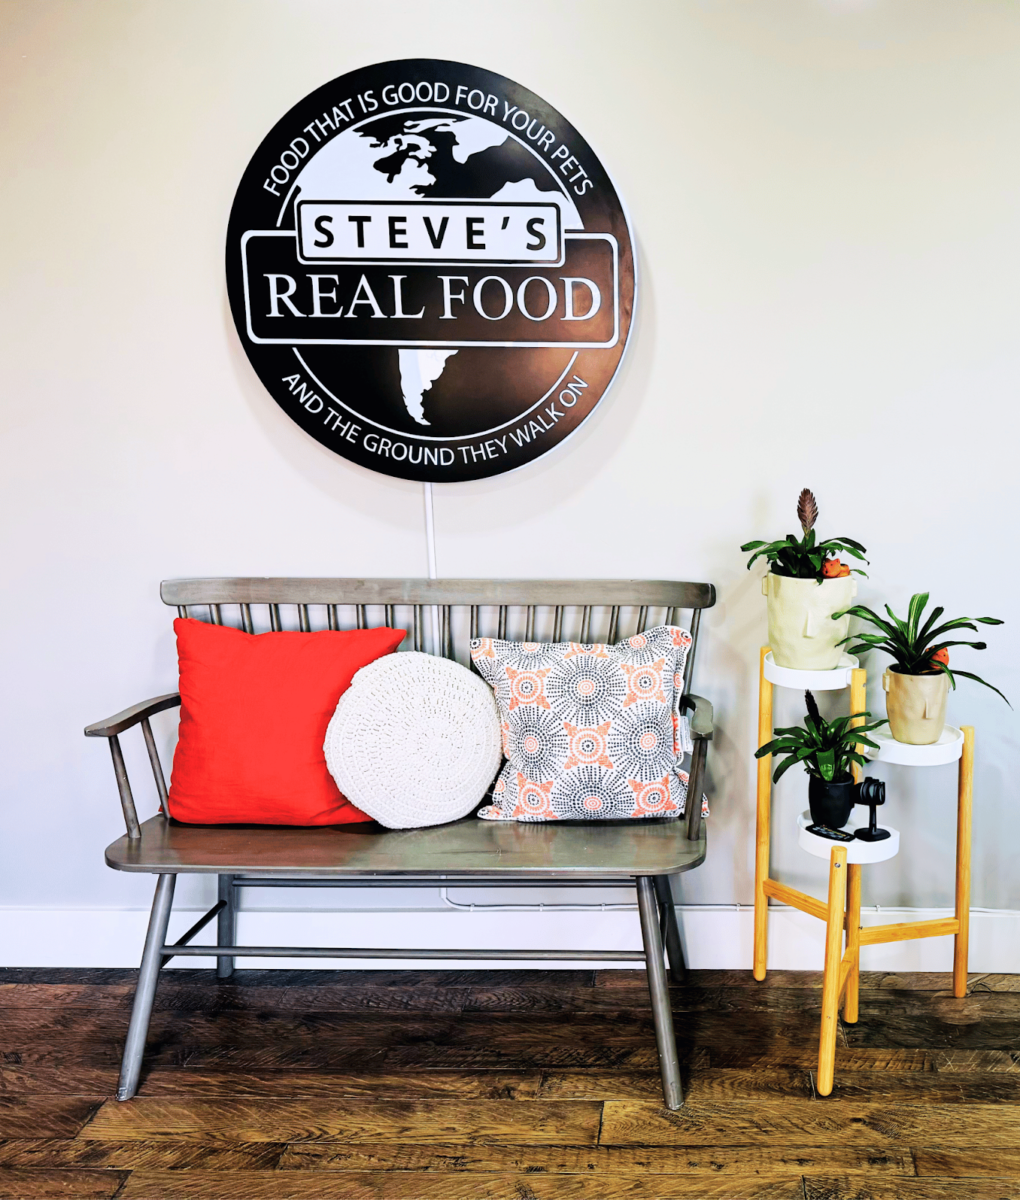 Chair in office under Steve's Real Food sign